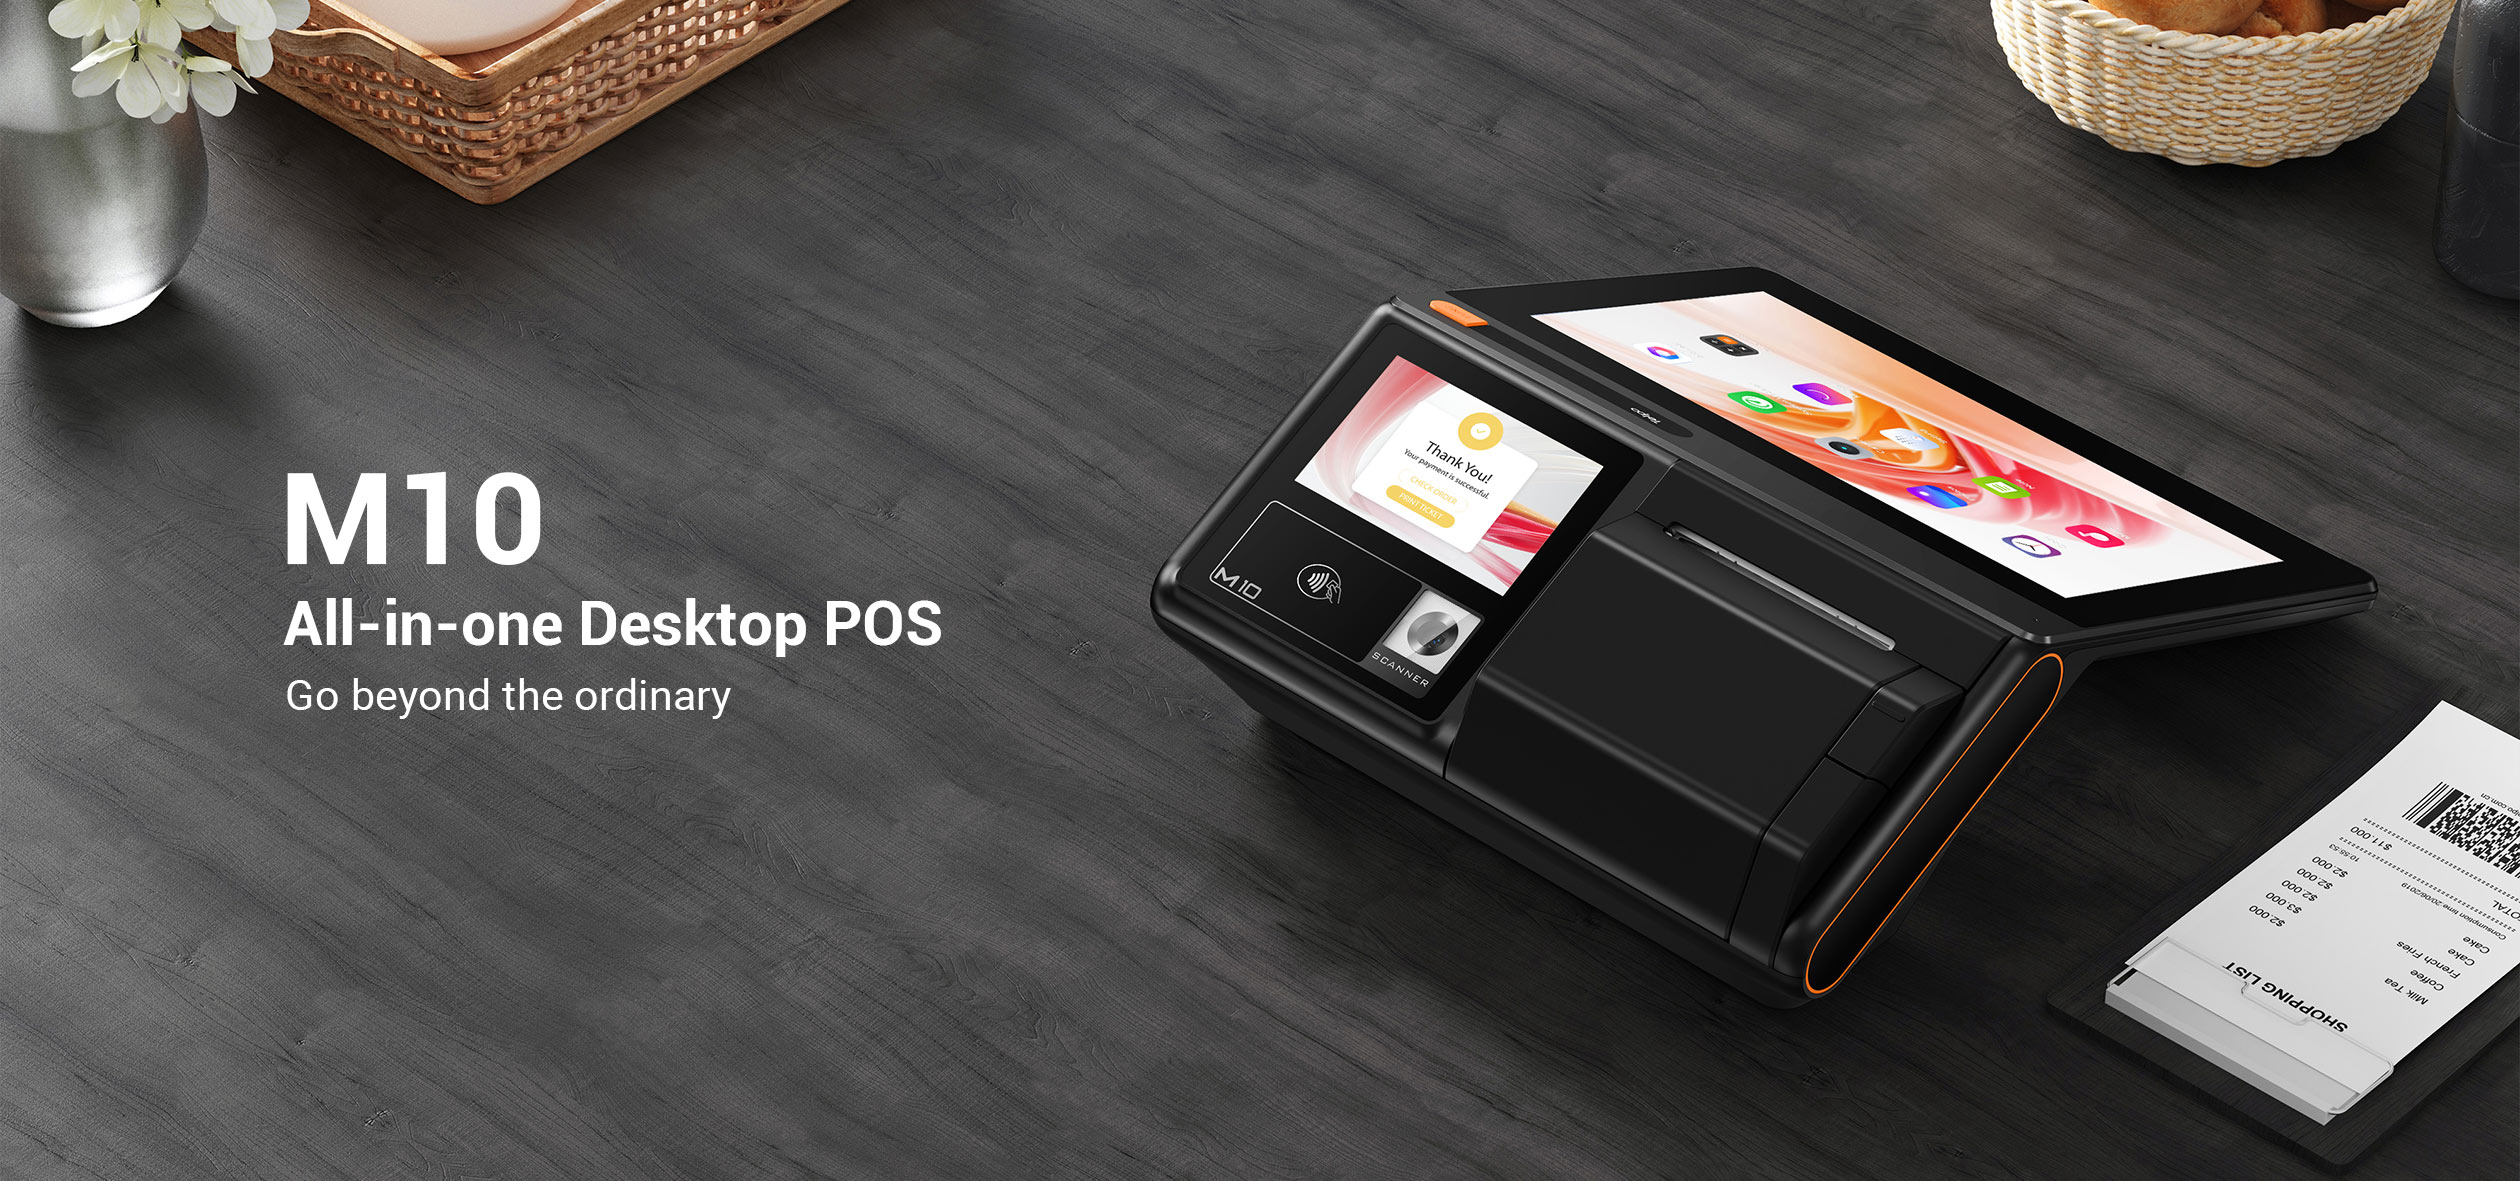 Telpo-M10-All-in-one-pos